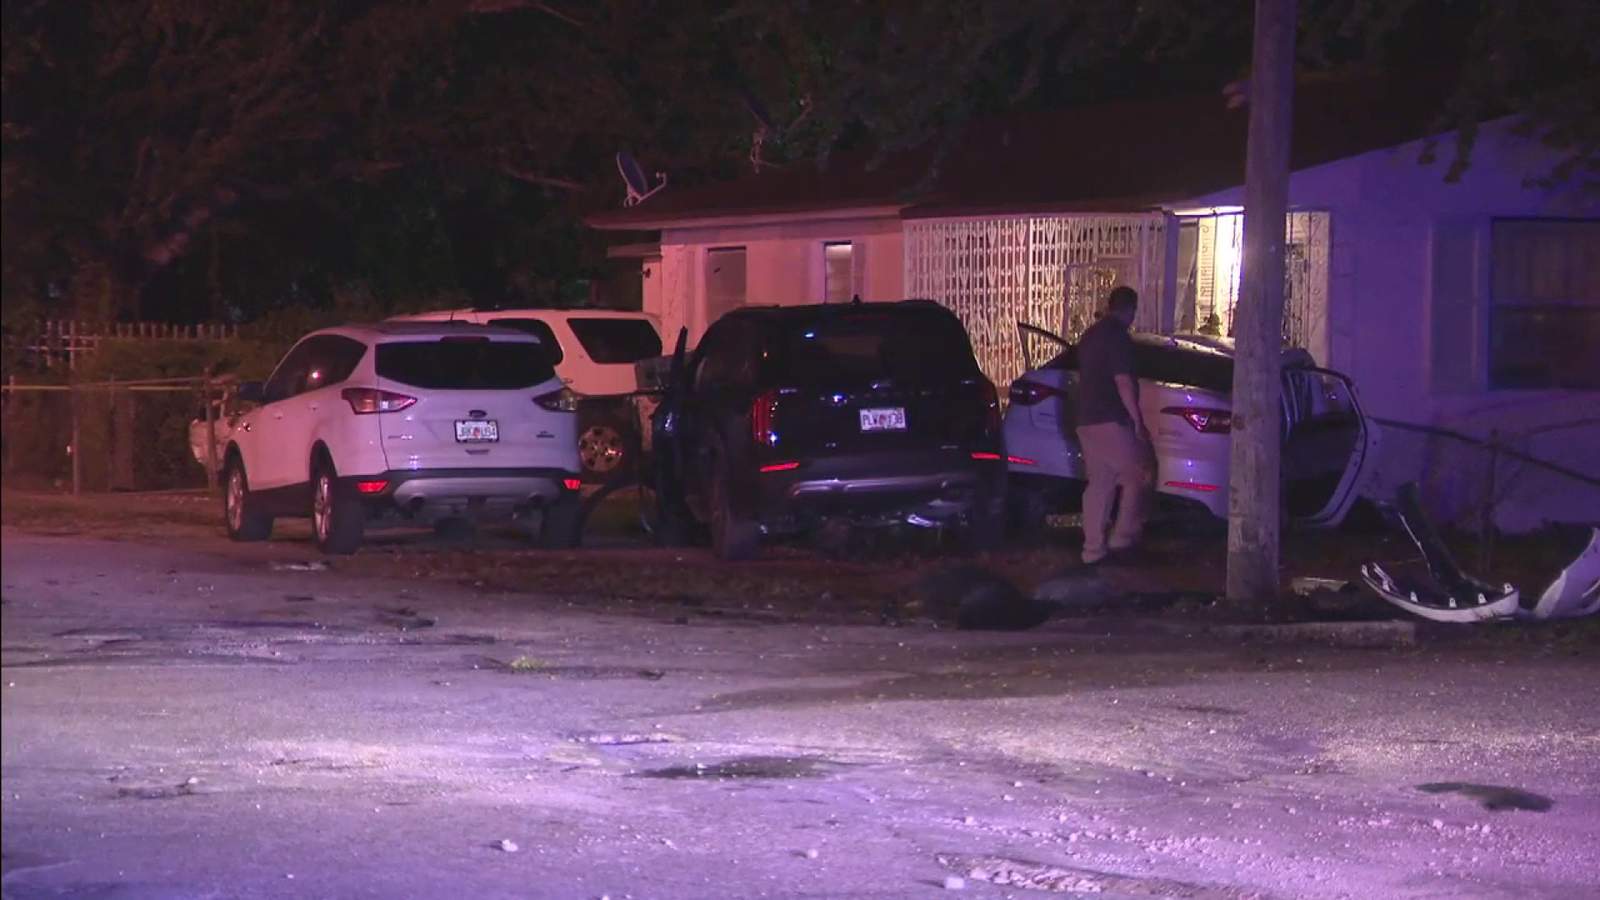 Man dies in hit-and-run crash after car plows into fence of home